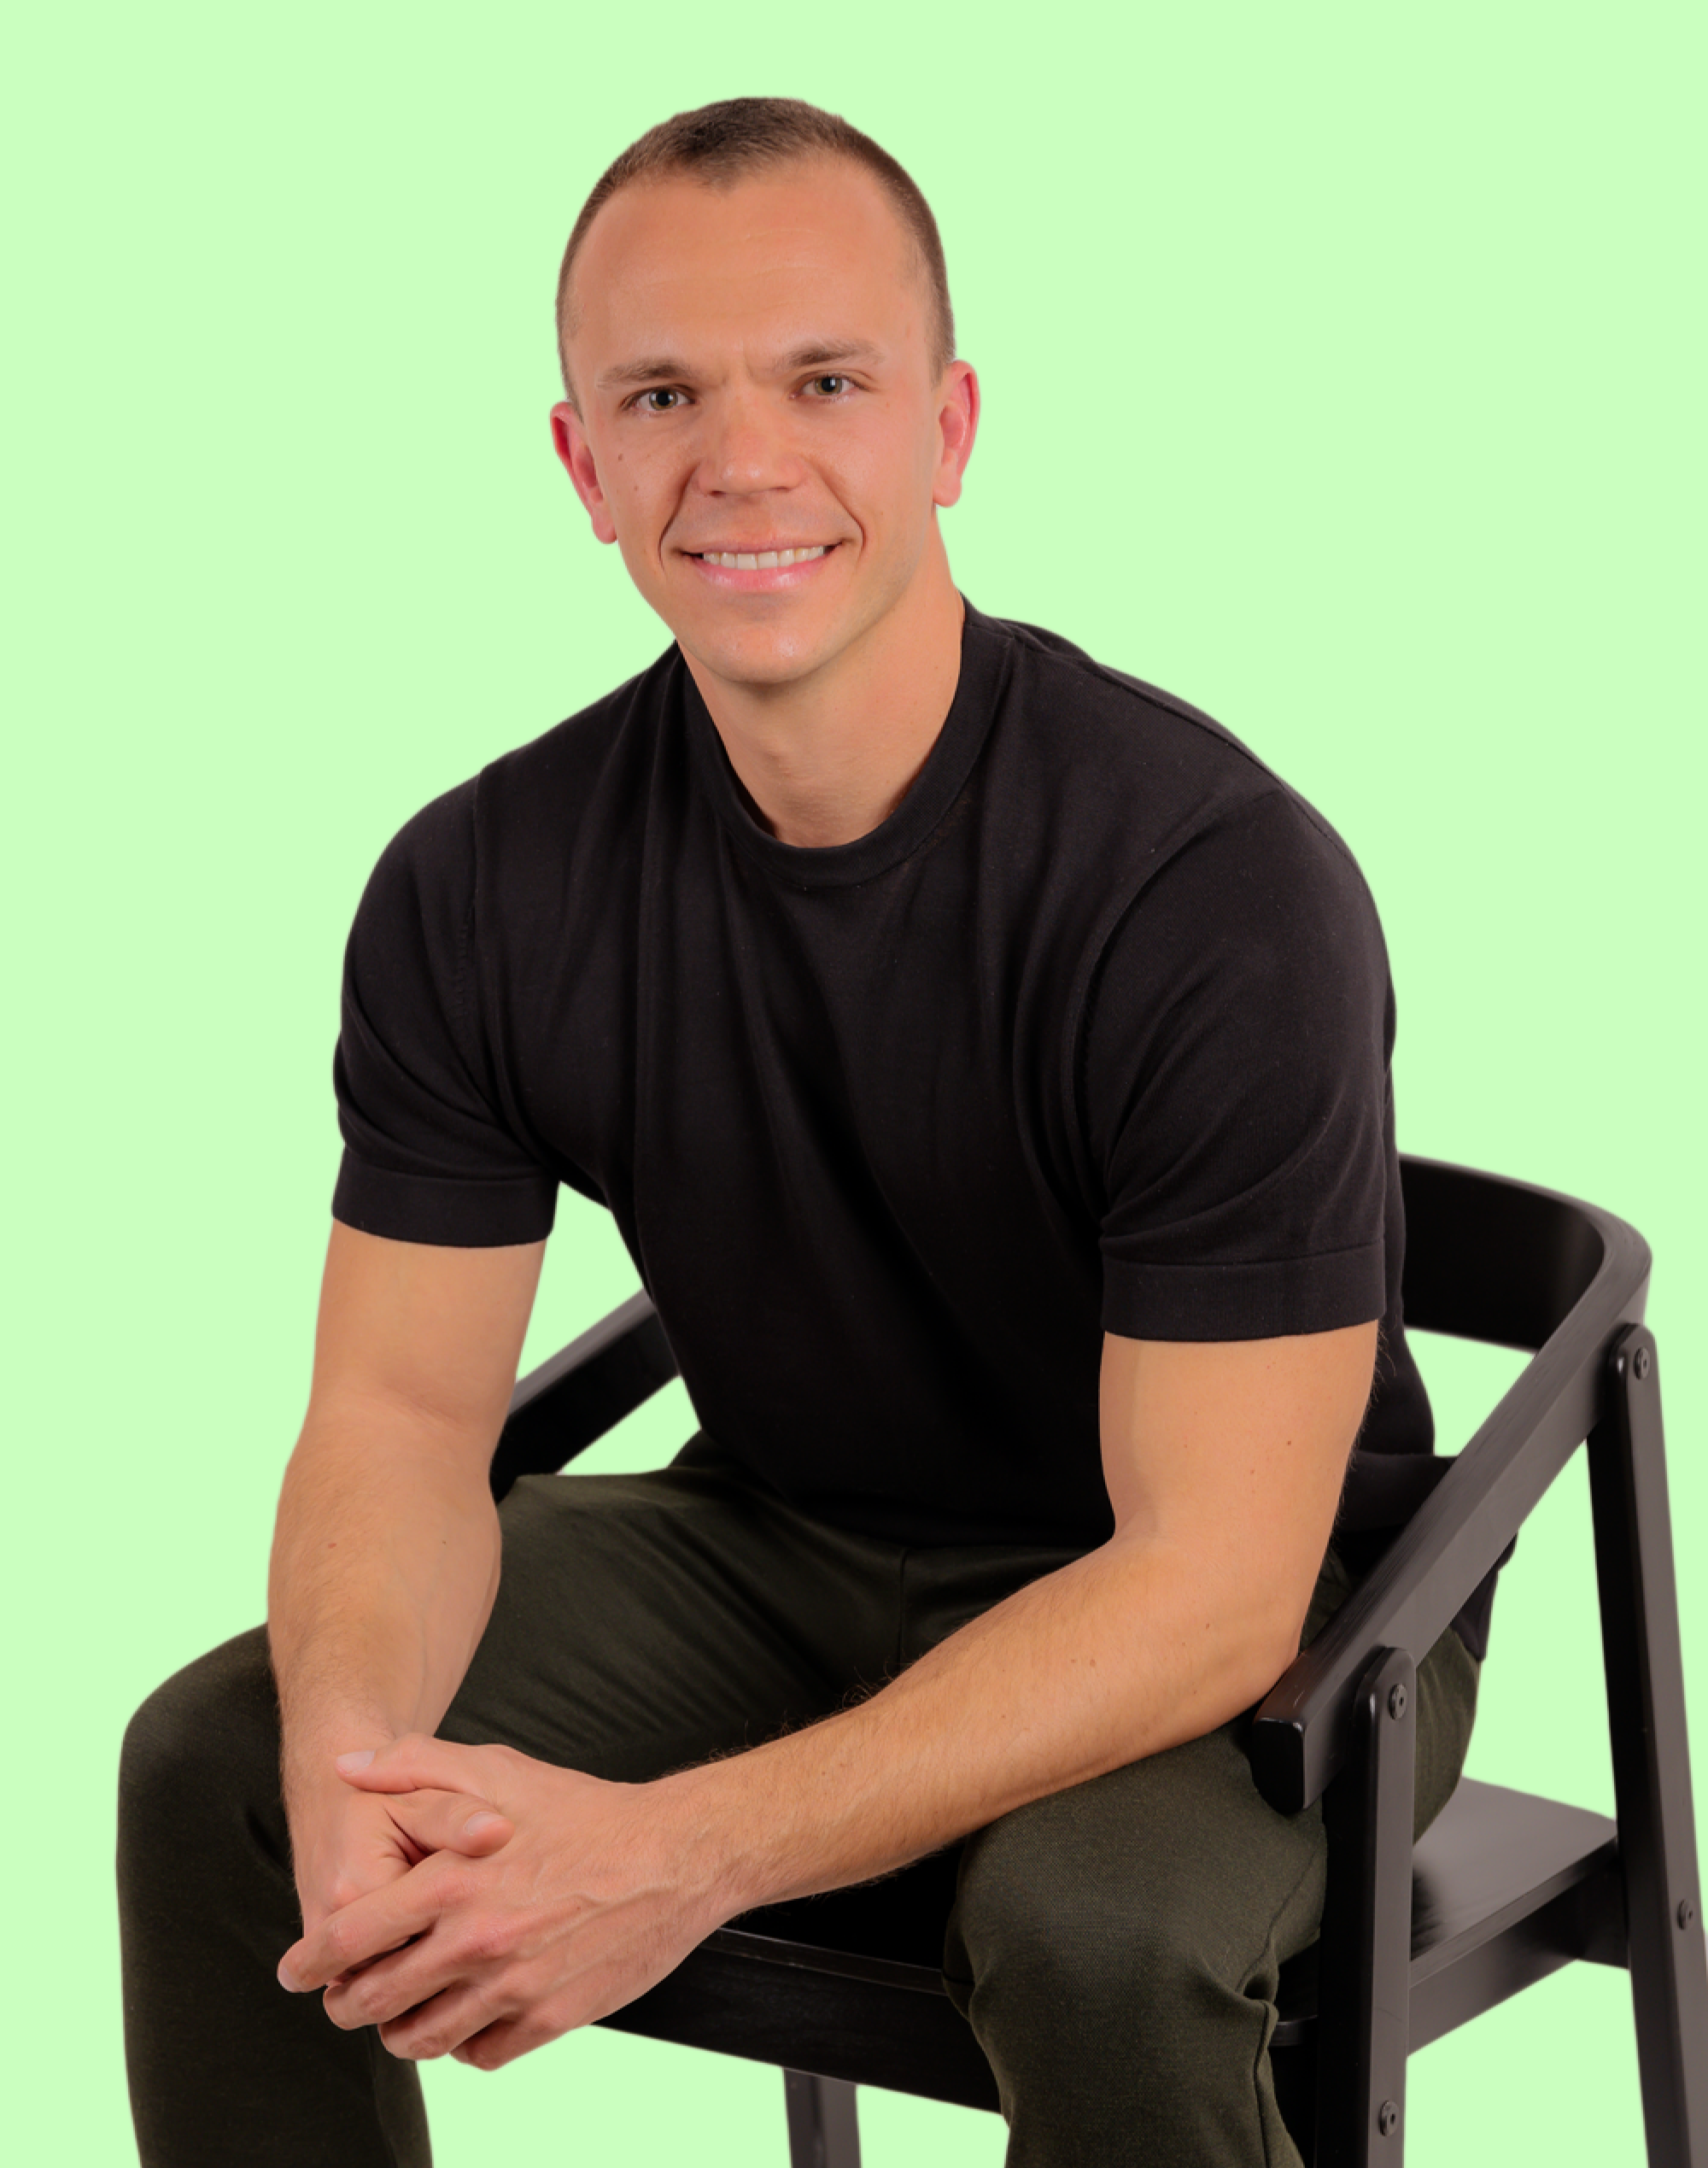 LIFEHACKR founder and CEO Christian P. Winter sitting on a chair